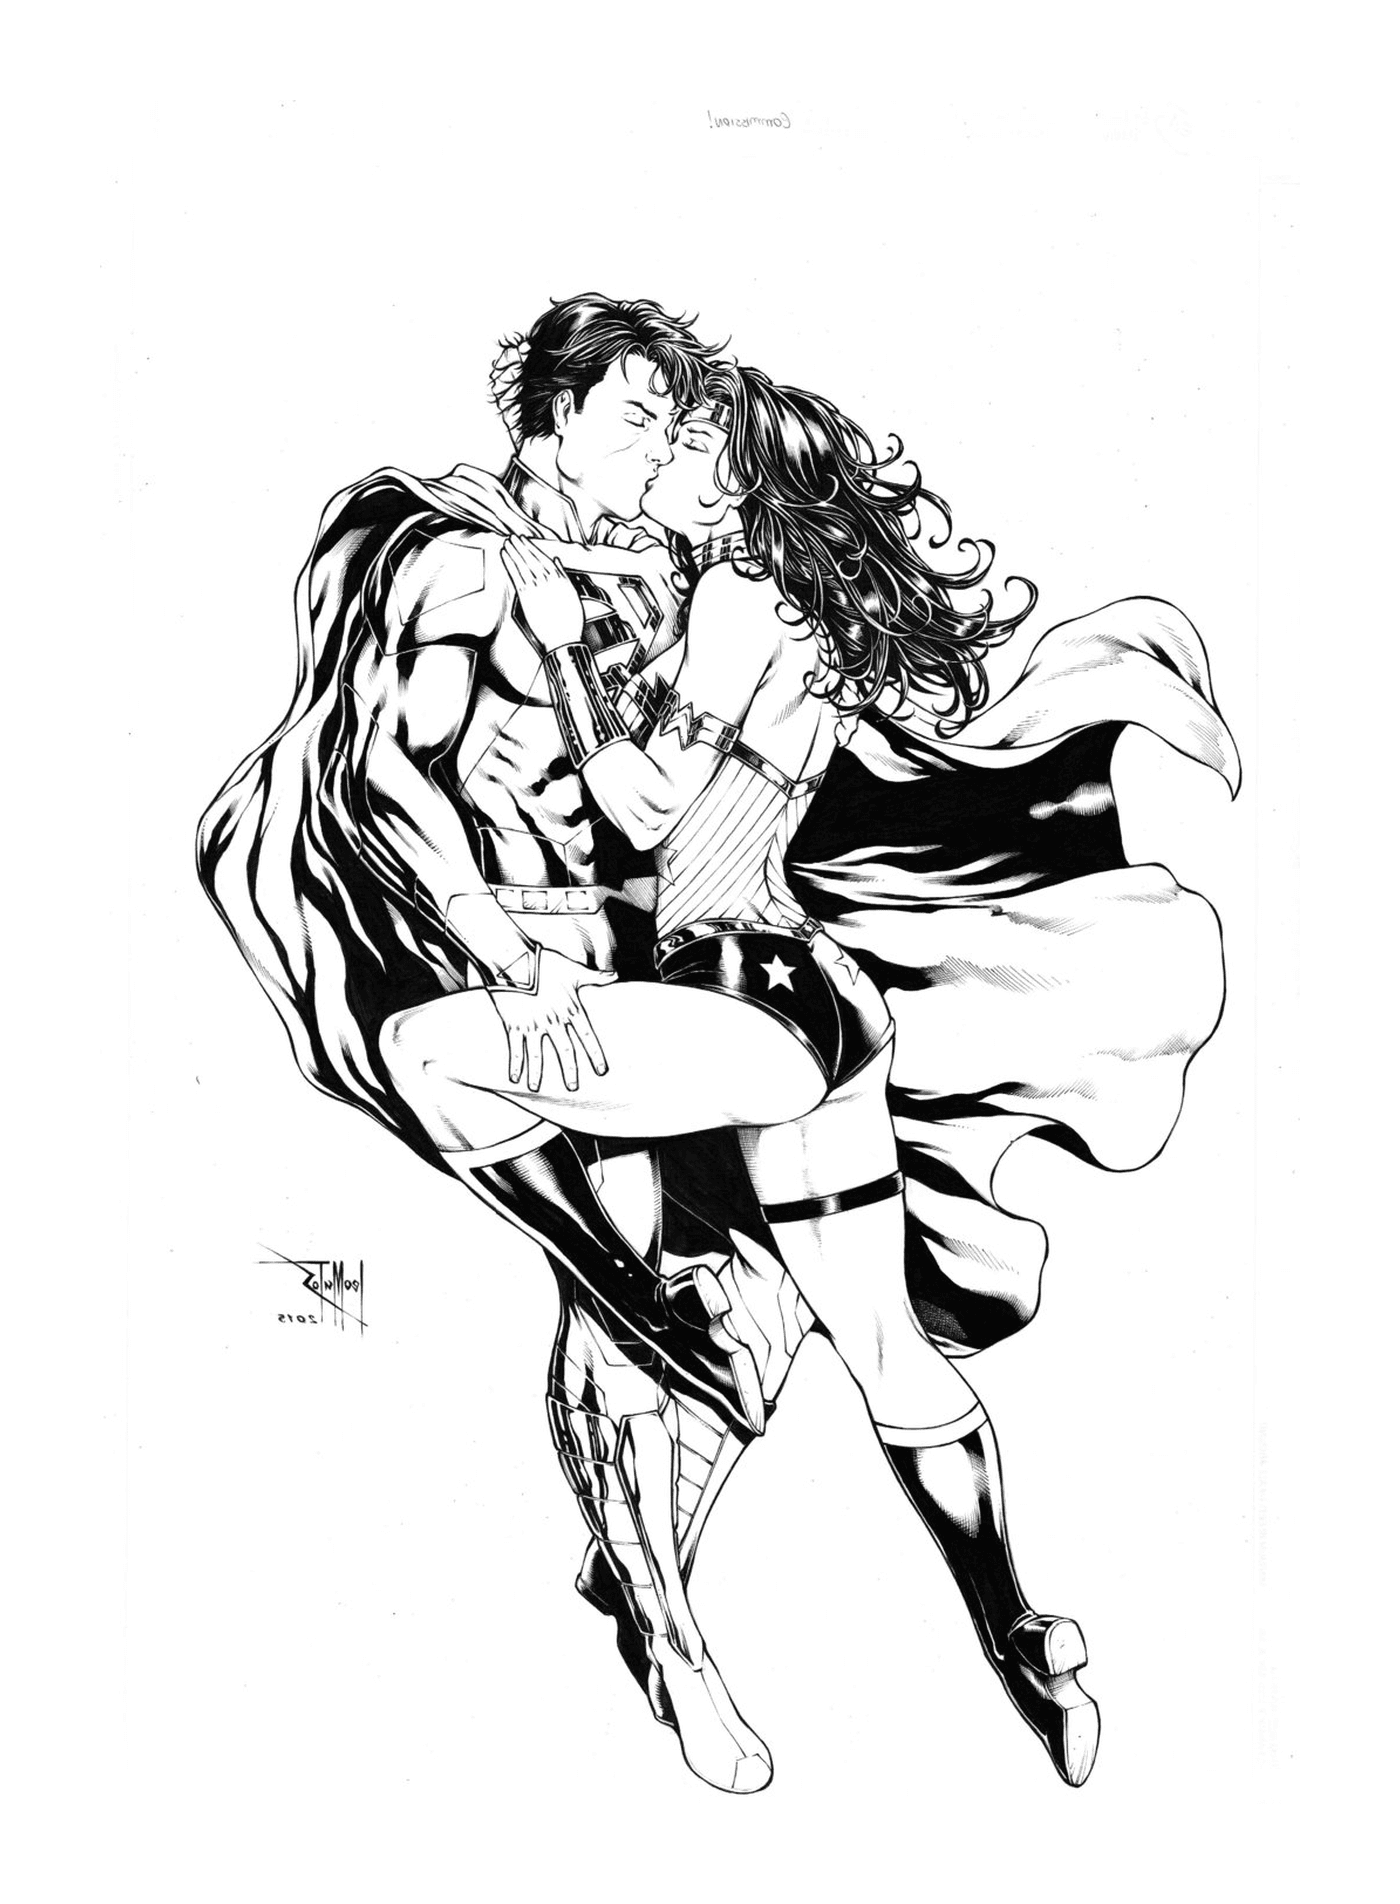  Superman and Wonder Woman kiss each other 